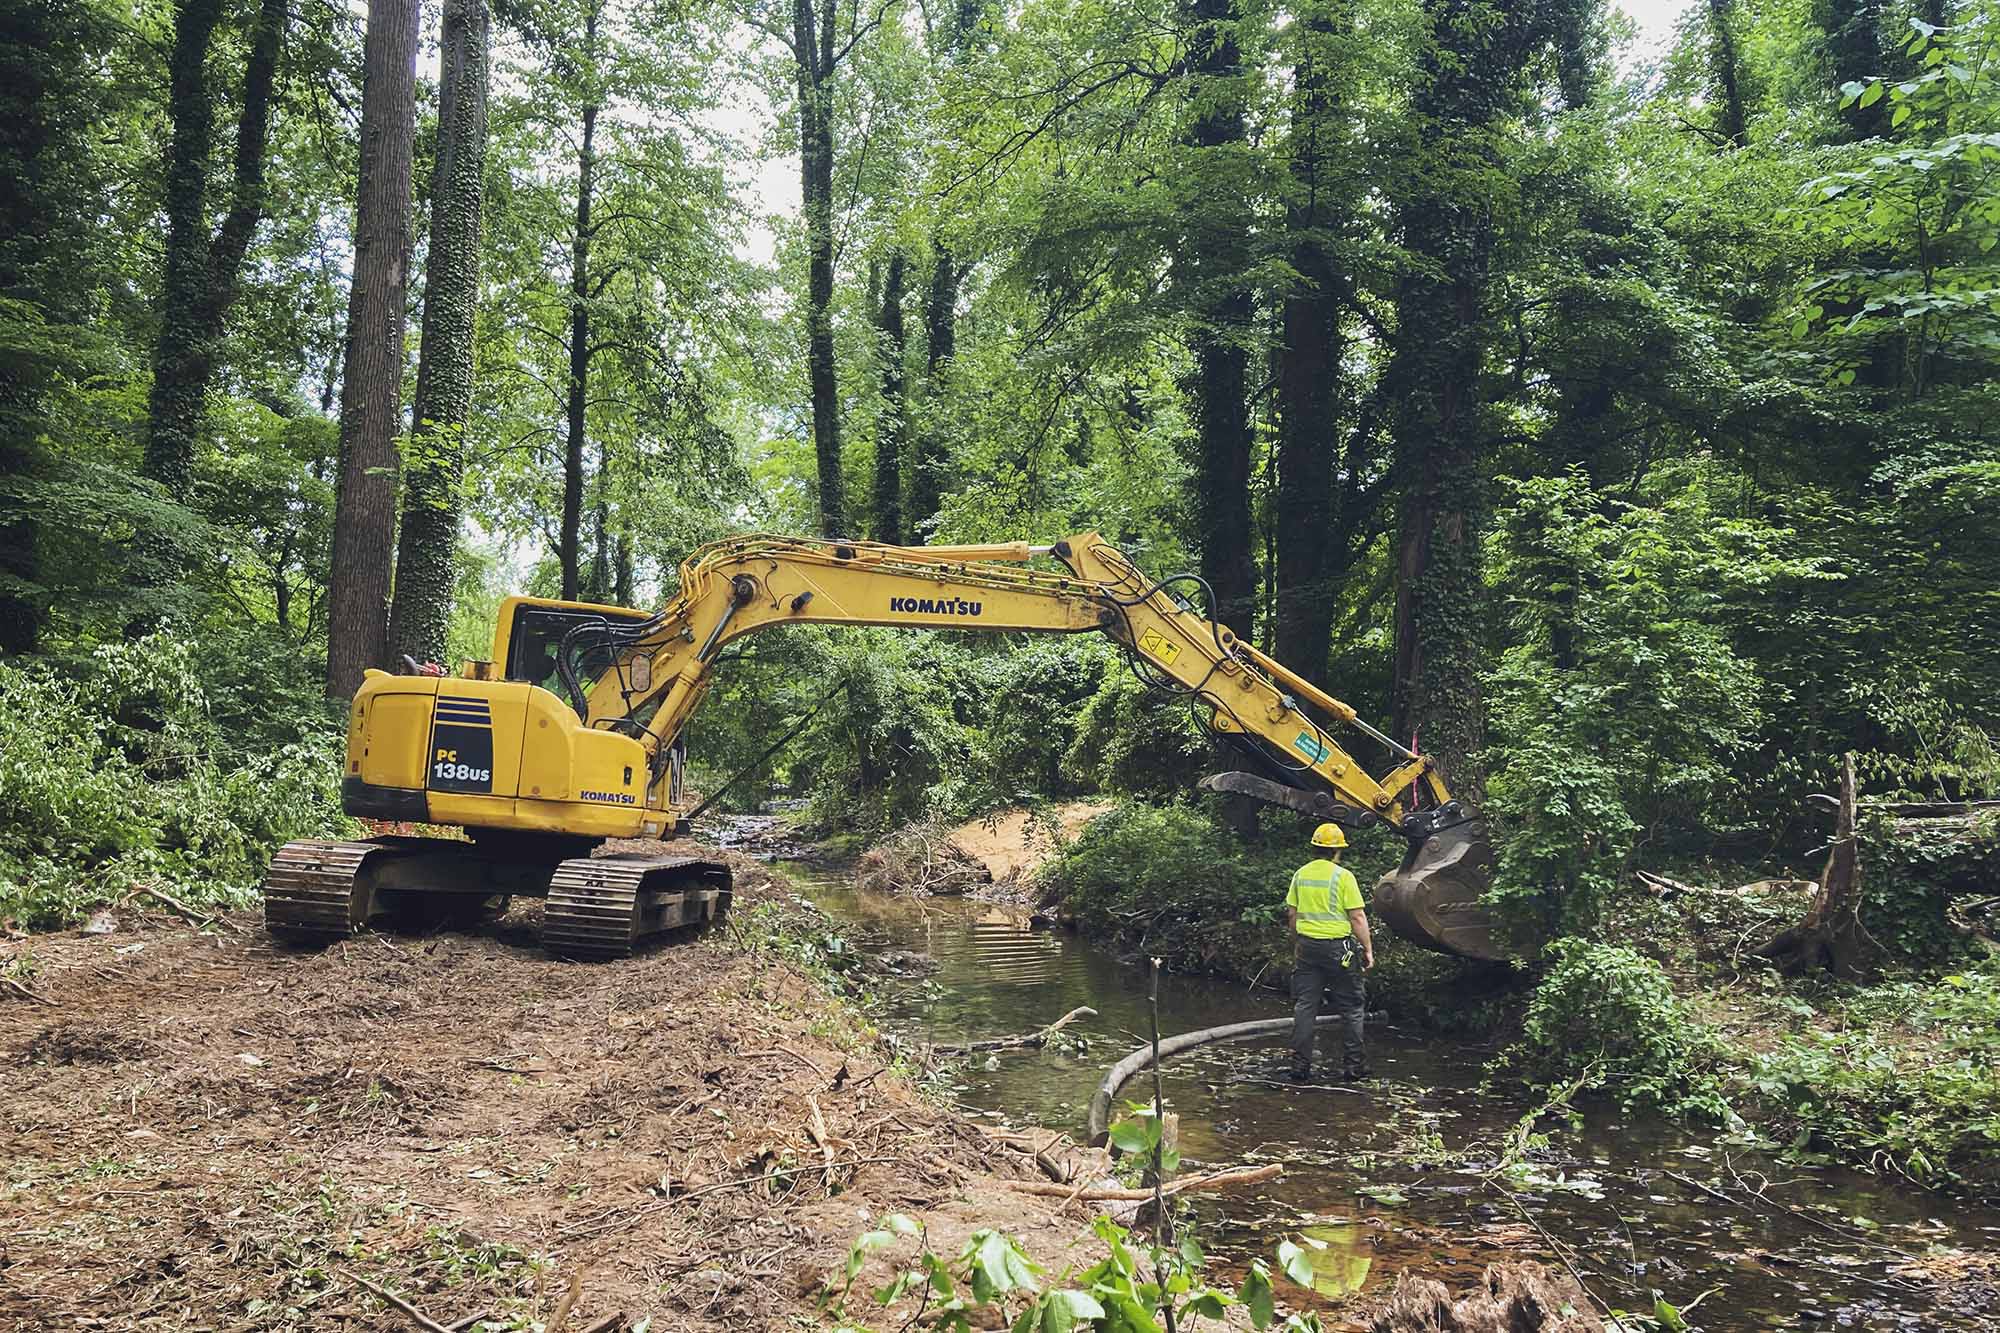 Backhoe working on the bank of stream for preservation